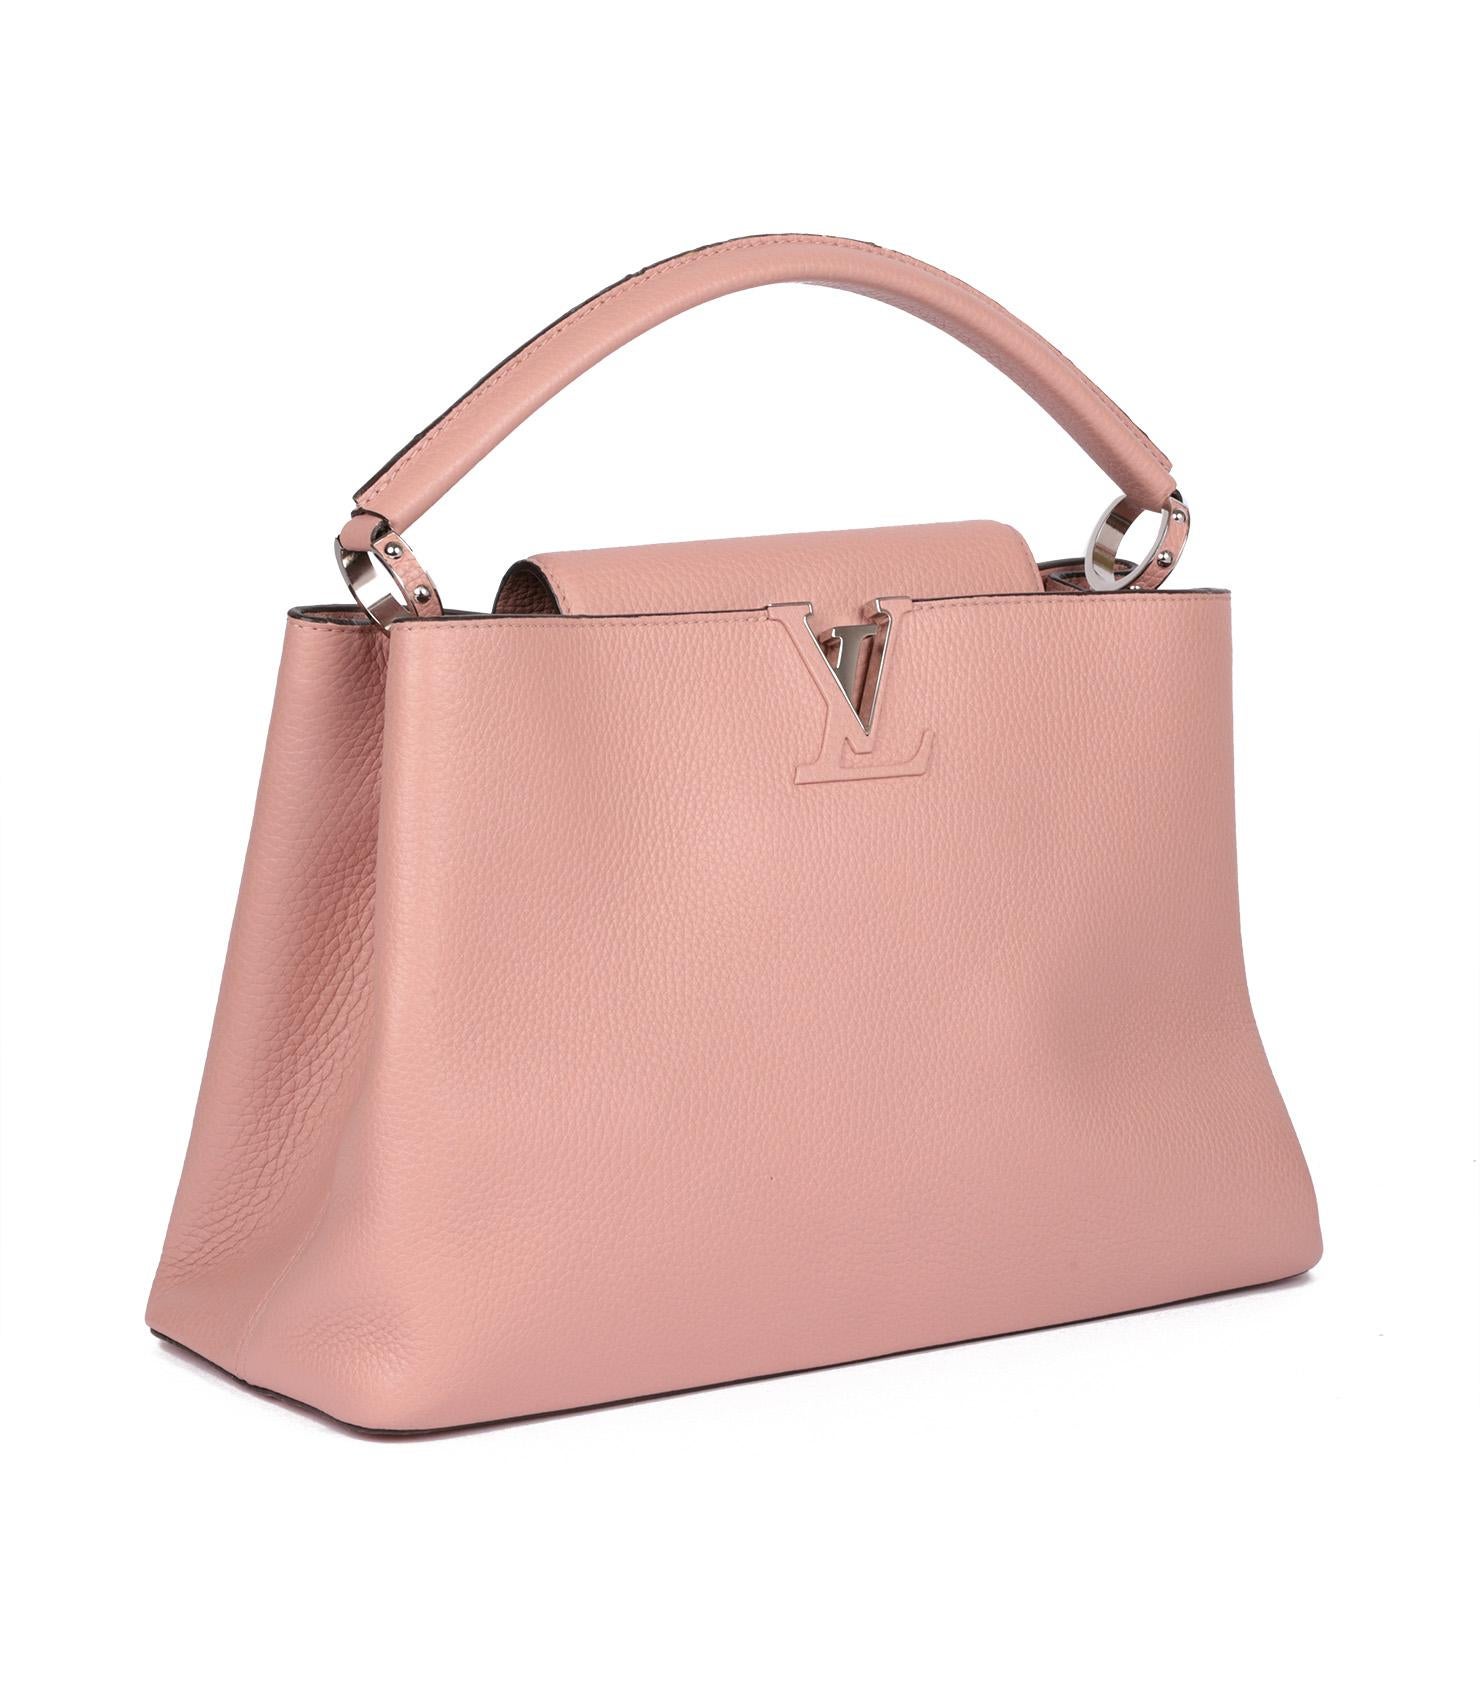 Louis Vuitton Pink Grained Calfskin Leather Capucines MM

Brand- Louis Vuitton
Model- Capucines MM
Product Type- Top Handle
Serial Number- TR****
Age- Circa 2013
Accompanied By- Louis Vuitton Dust Bag, Box
Colour- Pink
Hardware- Silver
Material(s)-